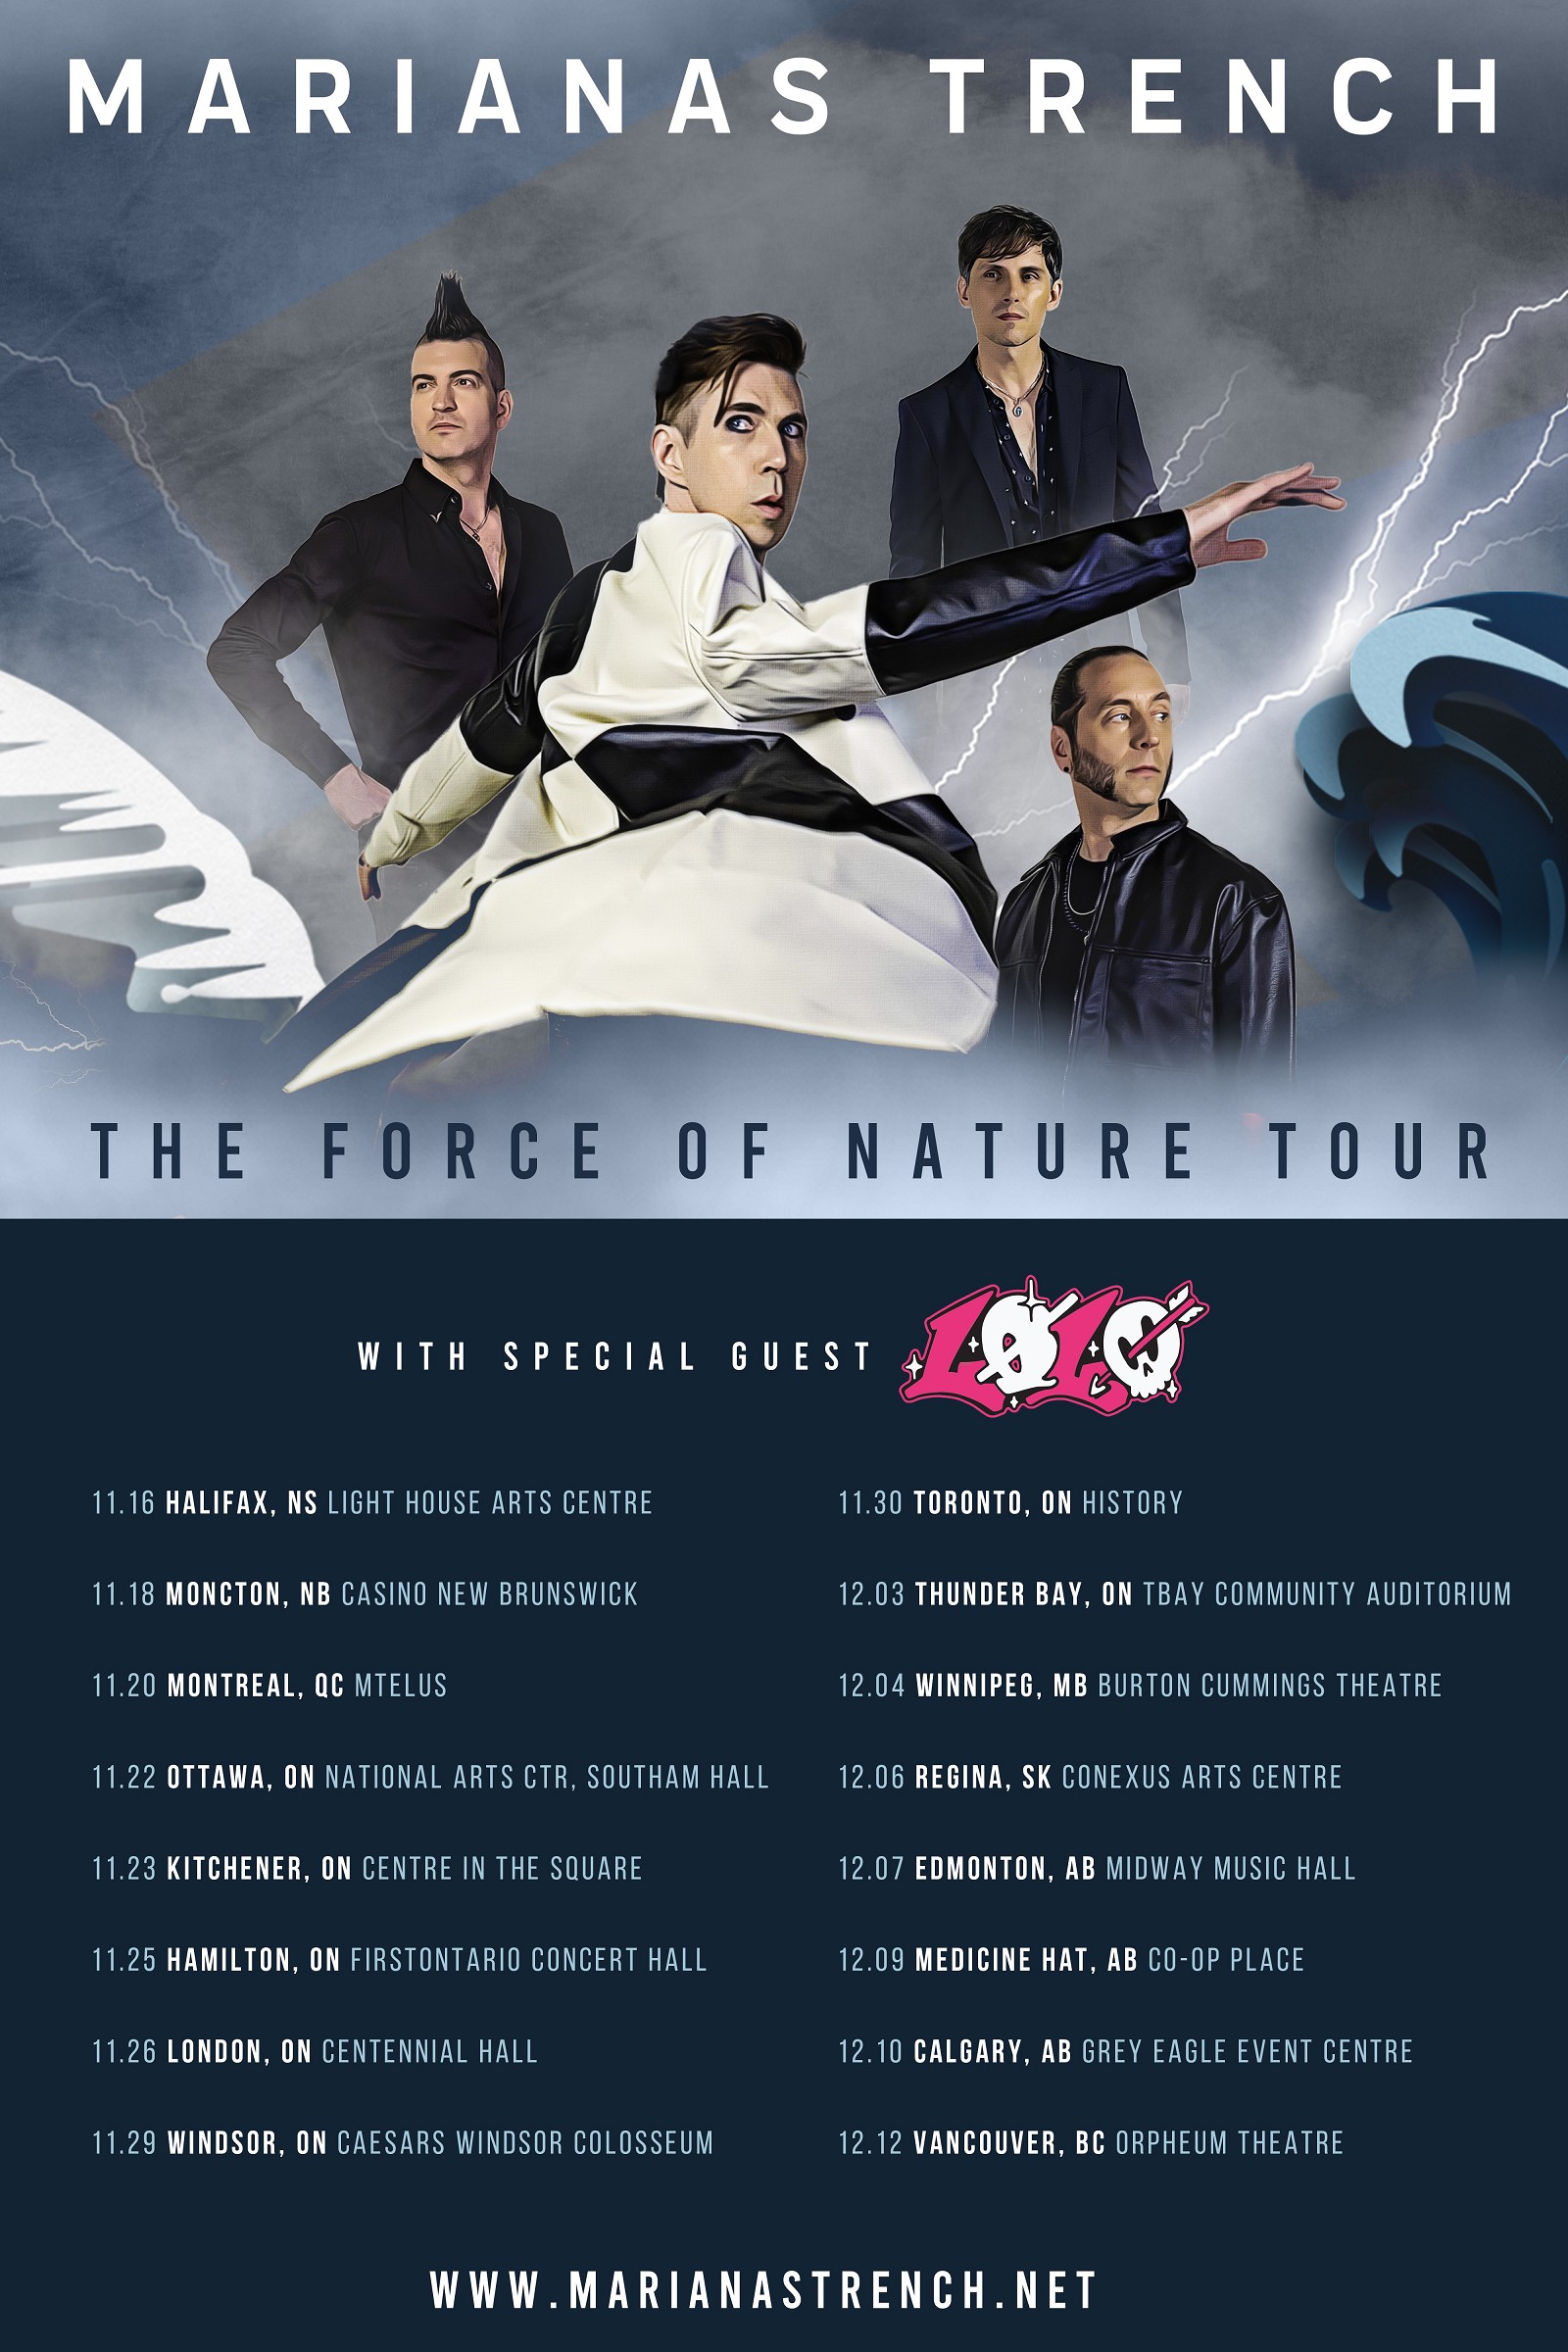 Marianas Trench - The Force of Nature Tour